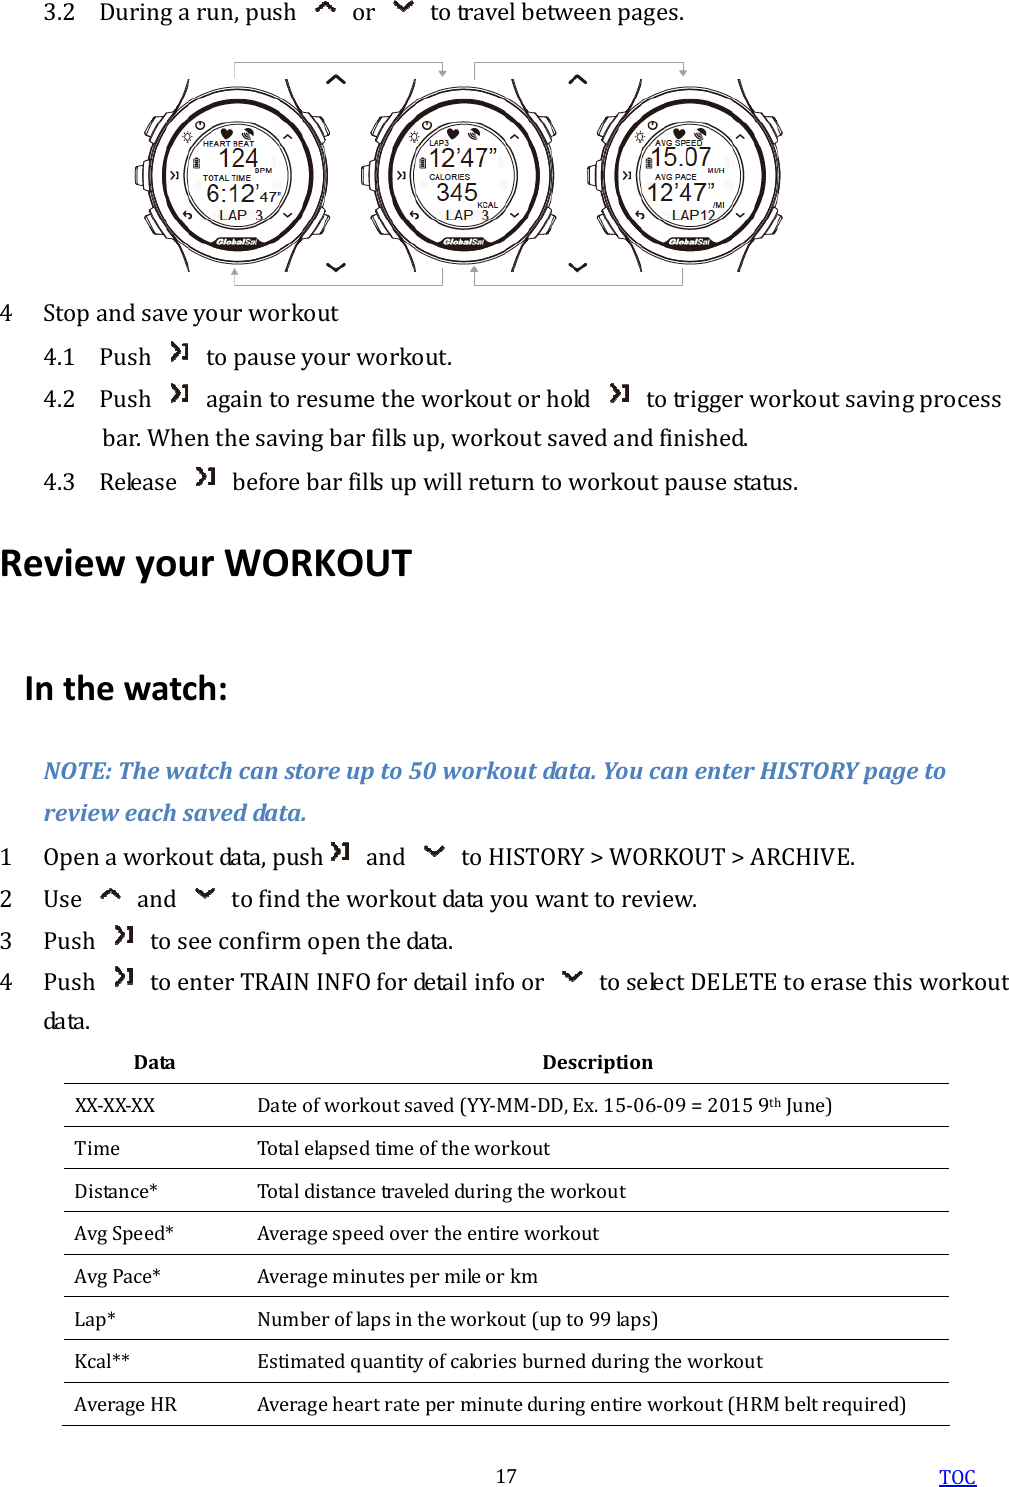  TOC 17 3.2 During a run, push    or    to travel between pages.   4 Stop and save your workout 4.1 Push    to pause your workout. 4.2 Push    again to resume the workout or hold    to trigger workout saving process bar. When the saving bar fills up, workout saved and finished. 4.3 Release    before bar fills up will return to workout pause status. Review your WORKOUT In the watch: NOTE: The watch can store up to 50 workout data. You can enter HISTORY page to review each saved data. 1 Open a workout data, push   and    to HISTORY &gt; WORKOUT &gt; ARCHIVE. 2 Use    and    to find the workout data you want to review. 3 Push    to see confirm open the data. 4 Push    to enter TRAIN INFO for detail info or    to select DELETE to erase this workout data. Data  Description XX-XX-XX  Date of workout saved (YY-MM-DD, Ex. 15-06-09 = 2015 9th June) Time  Total elapsed time of the workout Distance*  Total distance traveled during the workout Avg Speed*  Average speed over the entire workout Avg Pace*  Average minutes per mile or km Lap*  Number of laps in the workout (up to 99 laps) Kcal**  Estimated quantity of calories burned during the workout Average HR  Average heart rate per minute during entire workout (HRM belt required) 